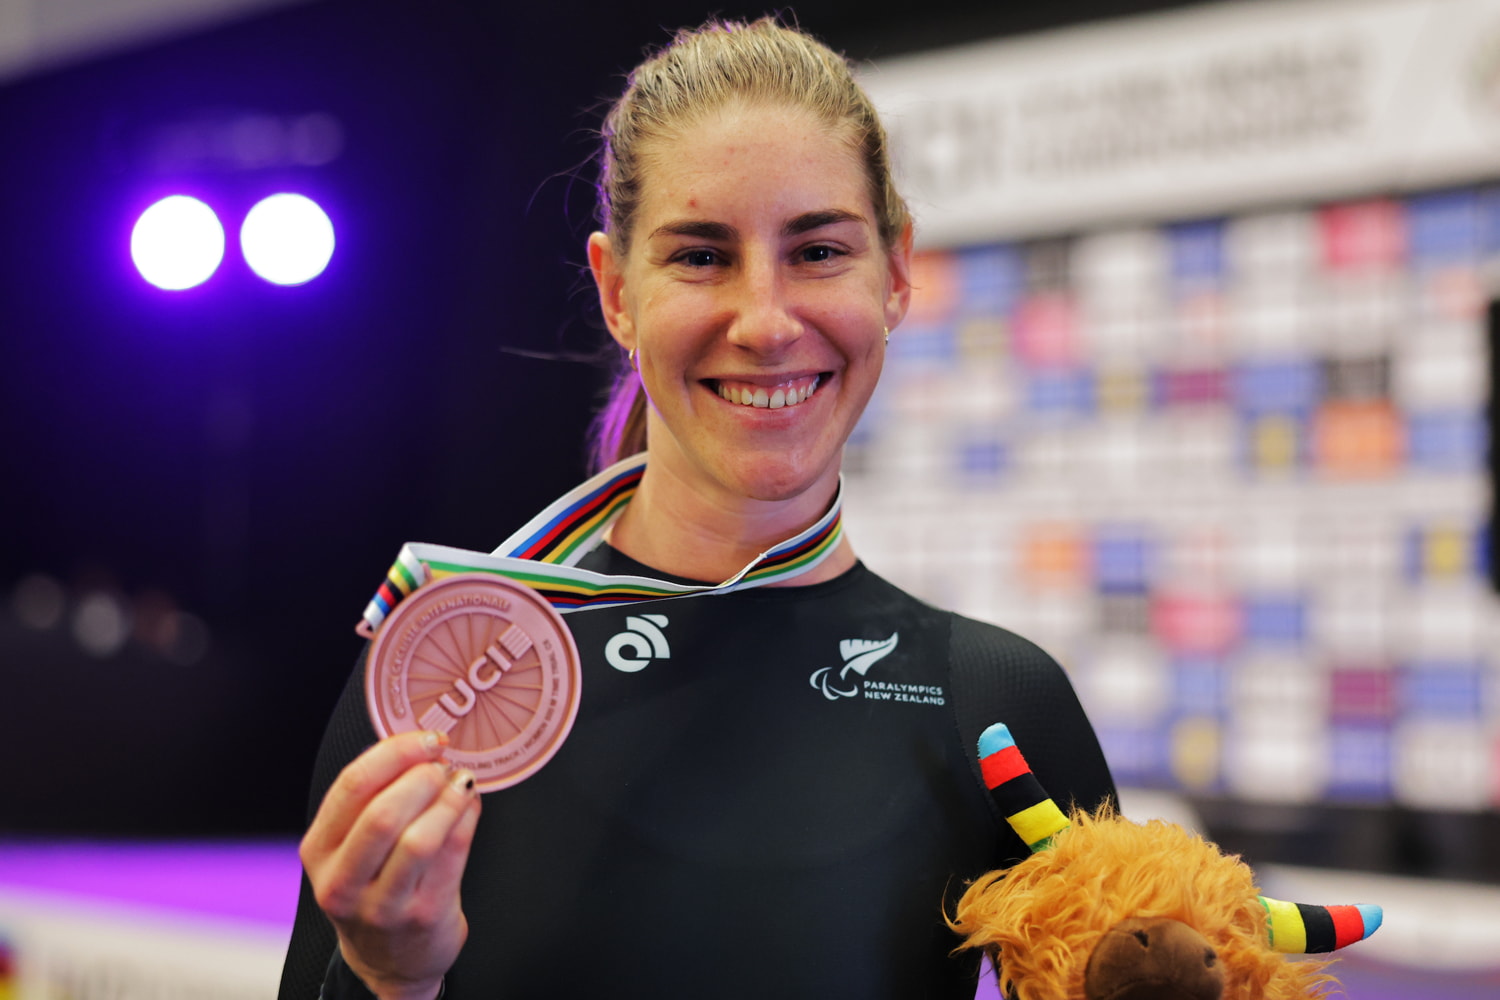 Nicole holds up bronze medal, smiling.